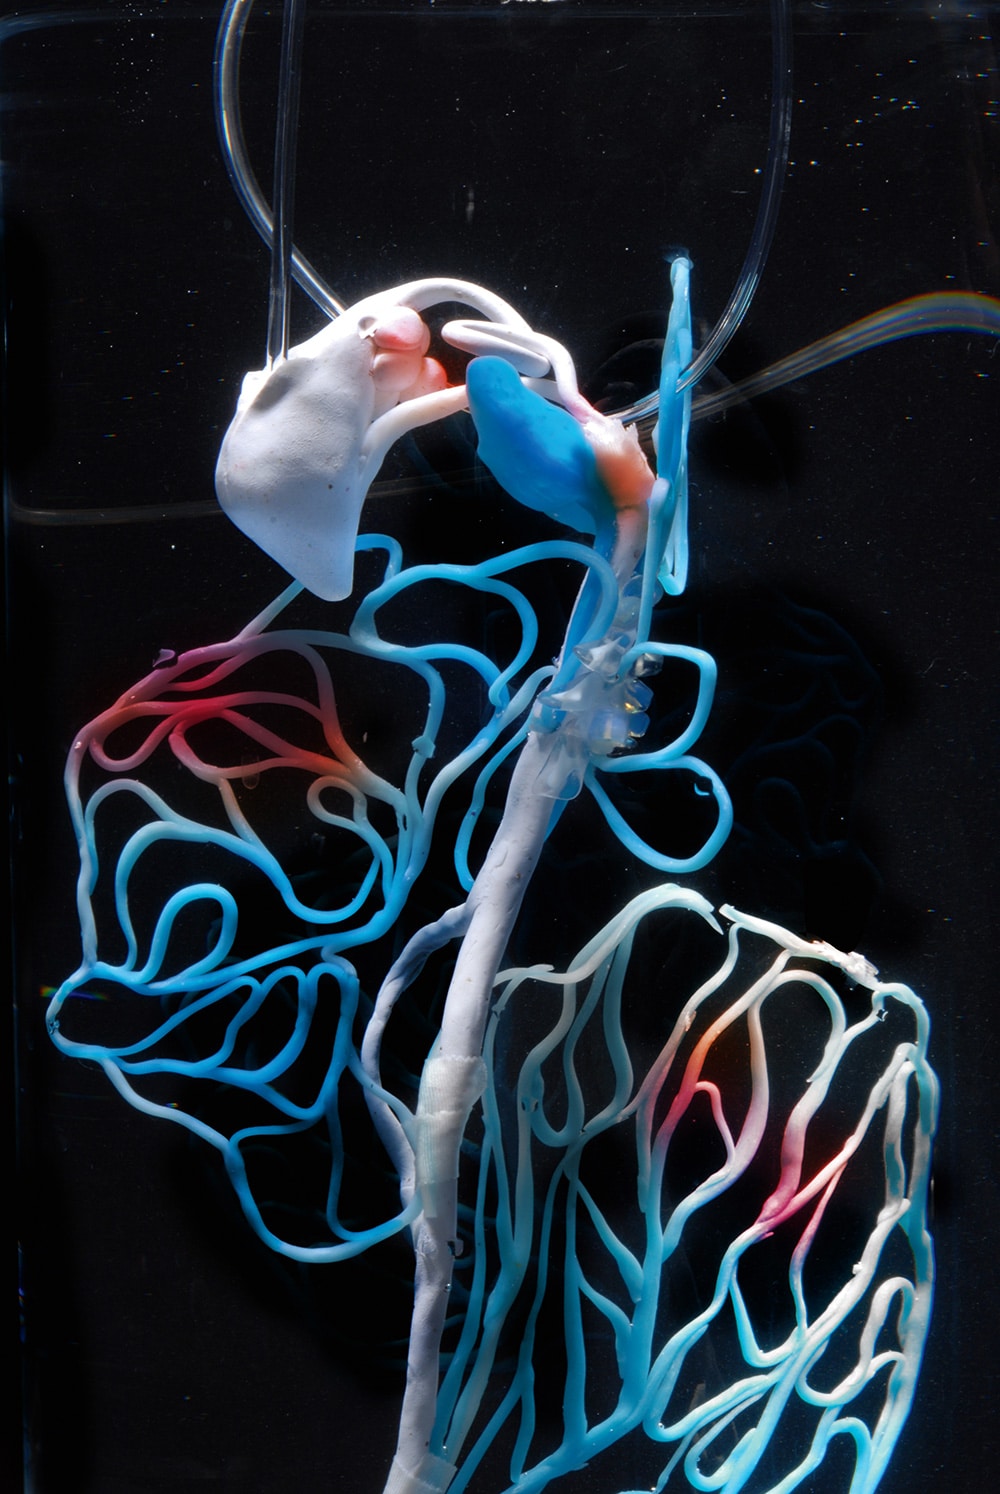 Artwort called »P-Plasticeptor« that is part of the »Ecosystem of Excess« by Pinar Yoldas. You see the detail of an organism with white, blue and red vein-like structure.